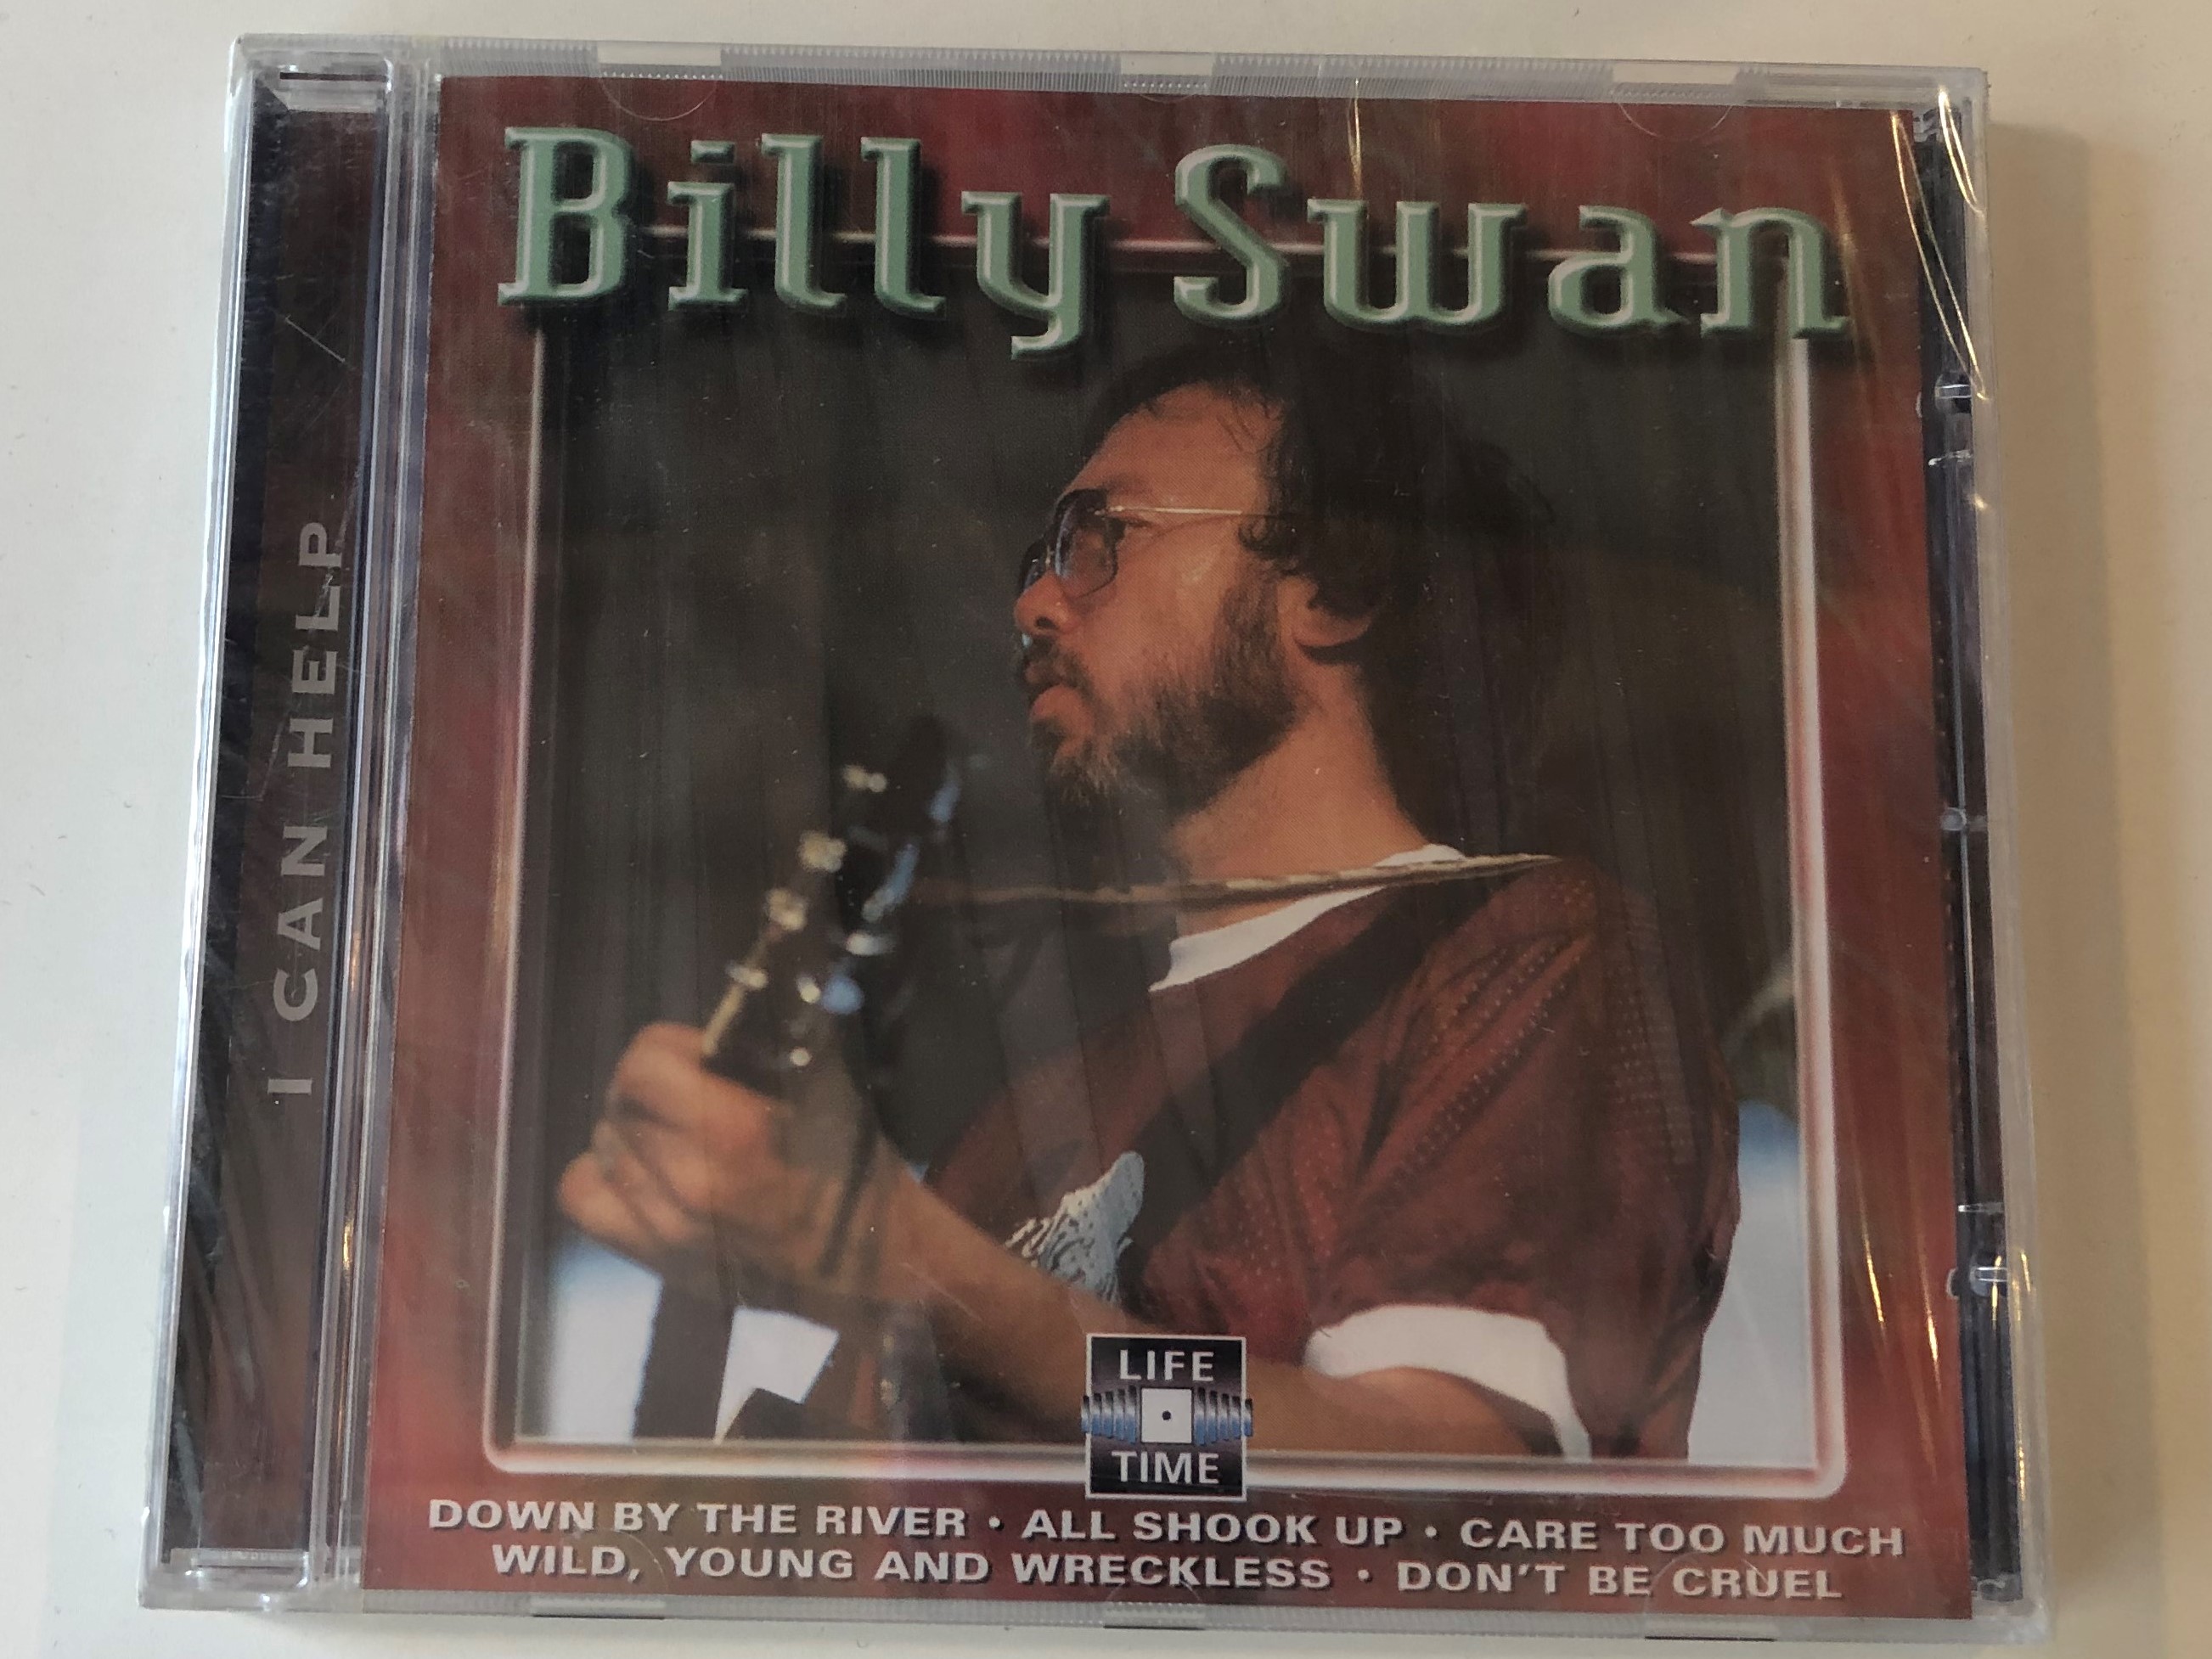 billy-swan-i-can-help-down-by-the-river-all-shook-up-care-too-much-wild-young-and-wreckless-don-t-be-cruel-digimode-entertainment-ltd.-audio-cd-1999-lt-5113-1-.jpg